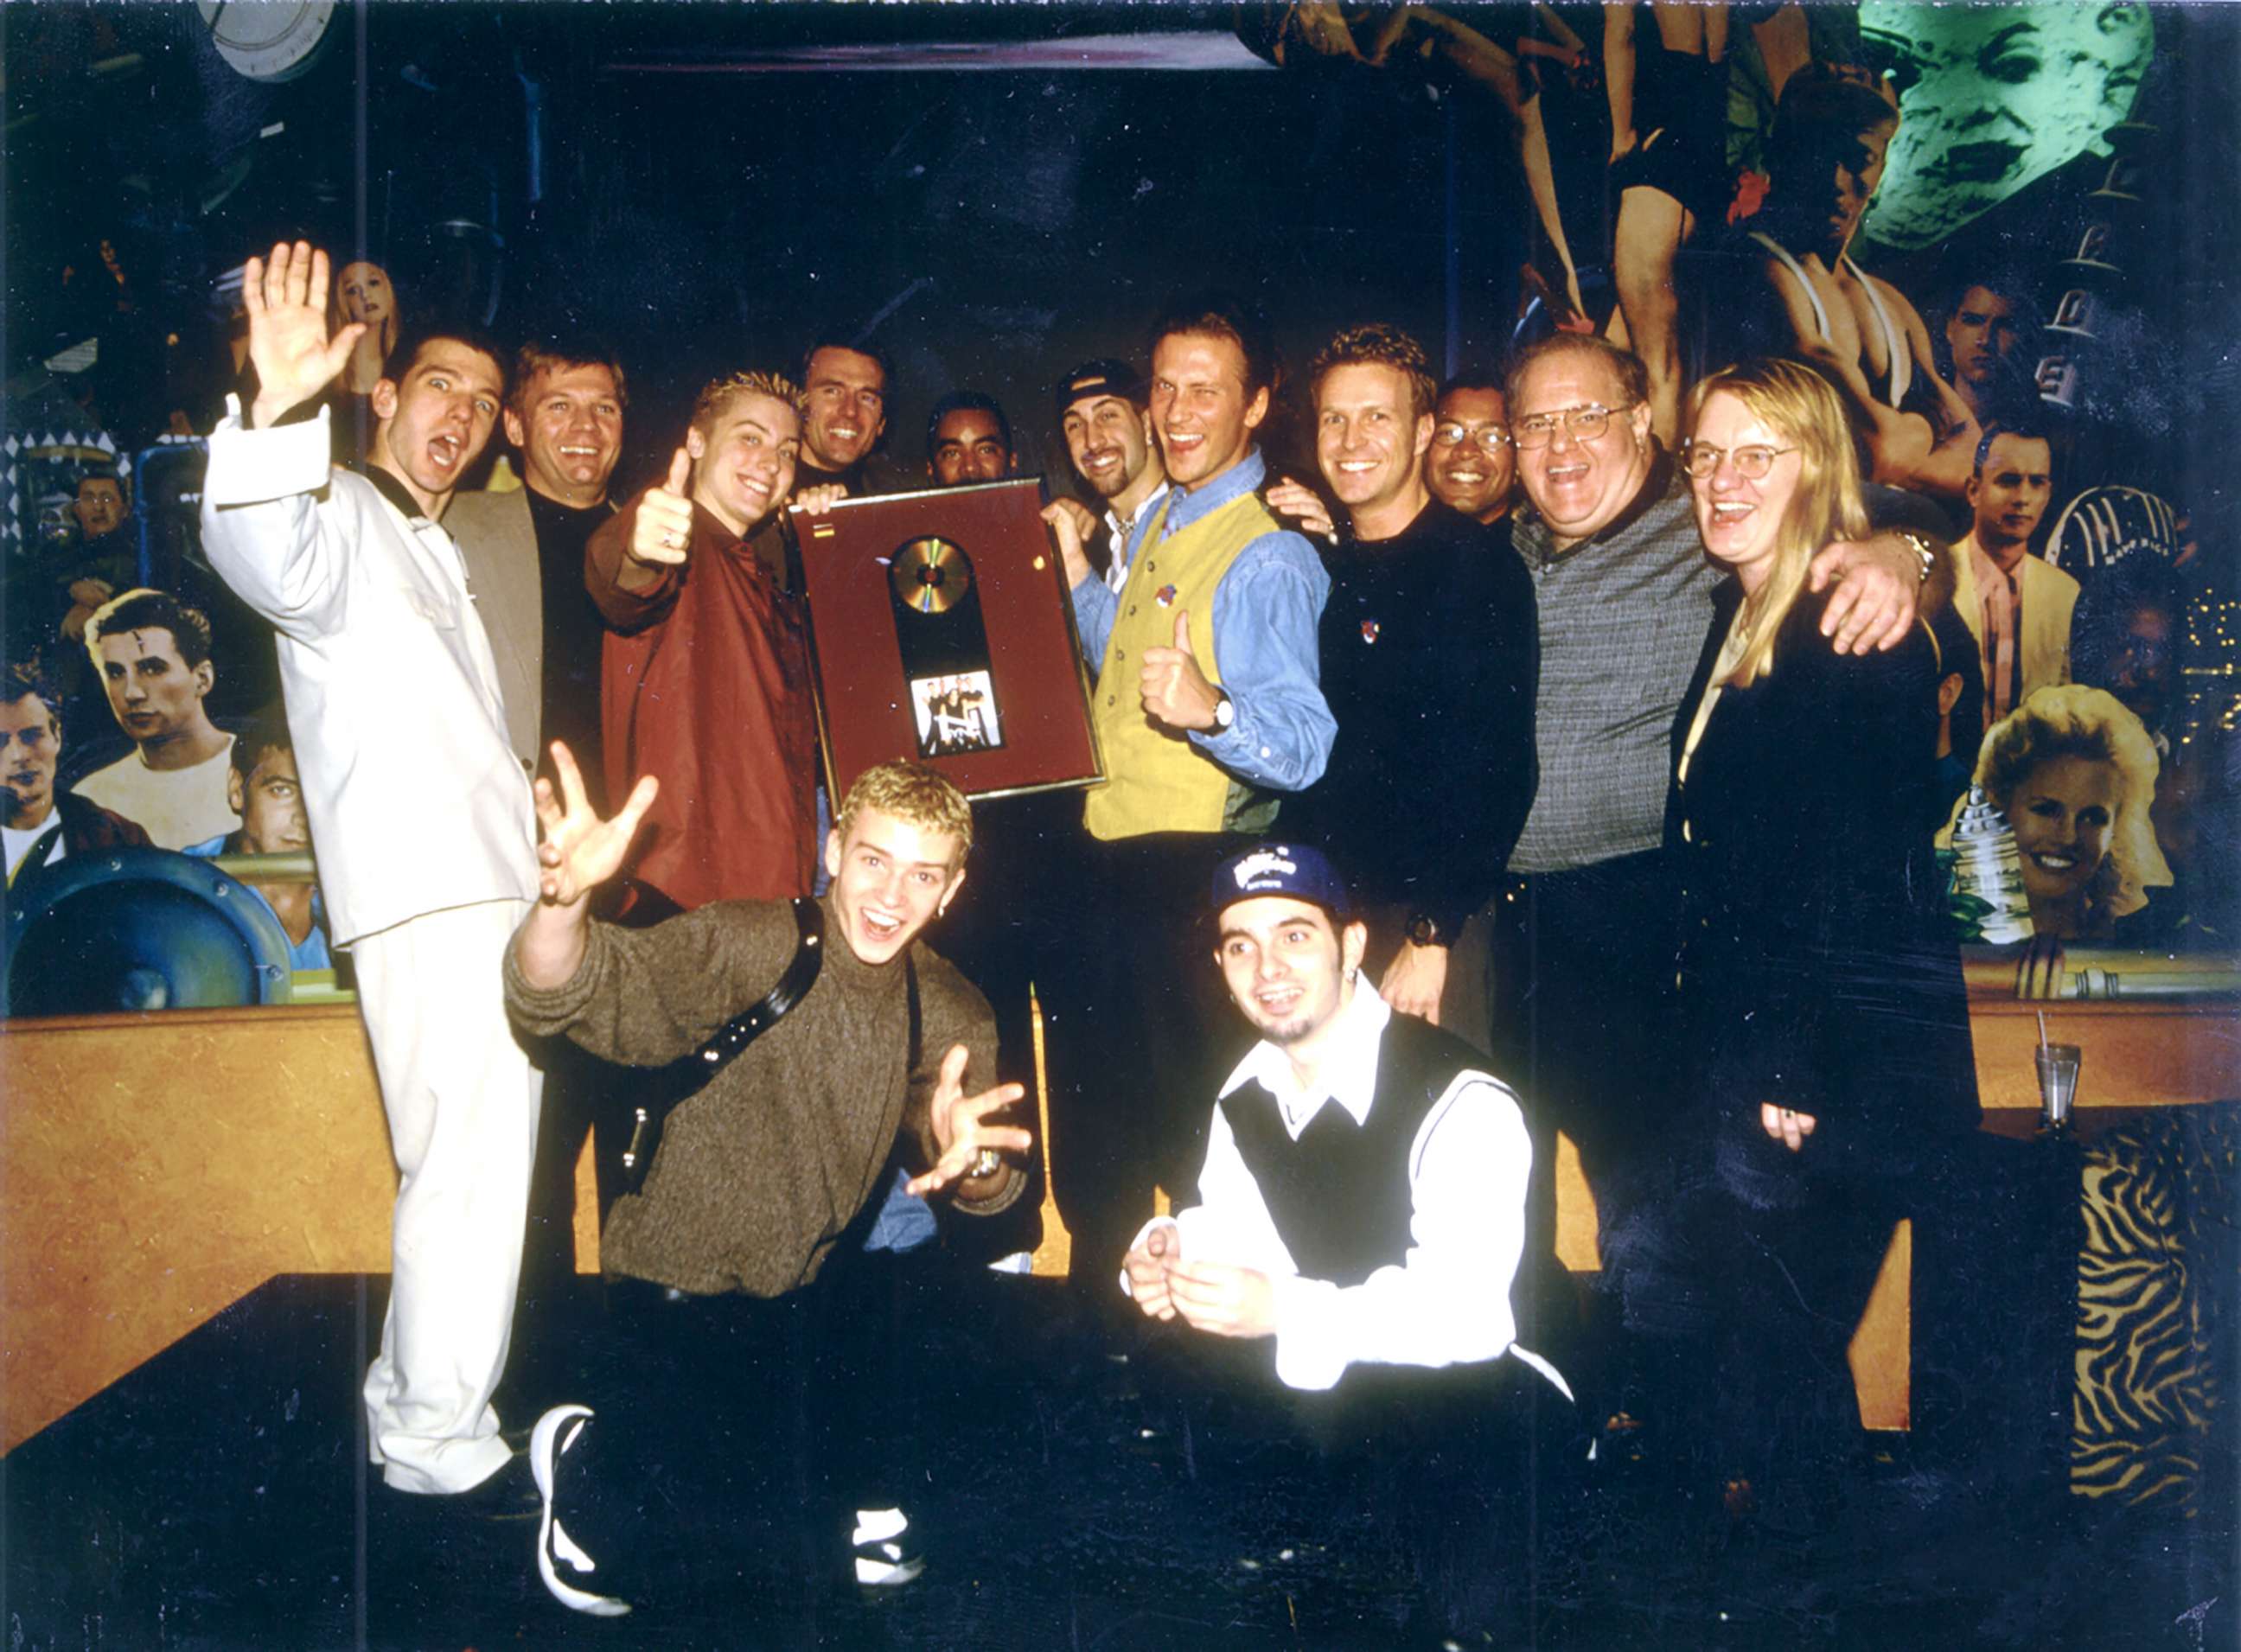 PHOTO: NSYNC pictured with Lou Pearlman at their gold album presentation.